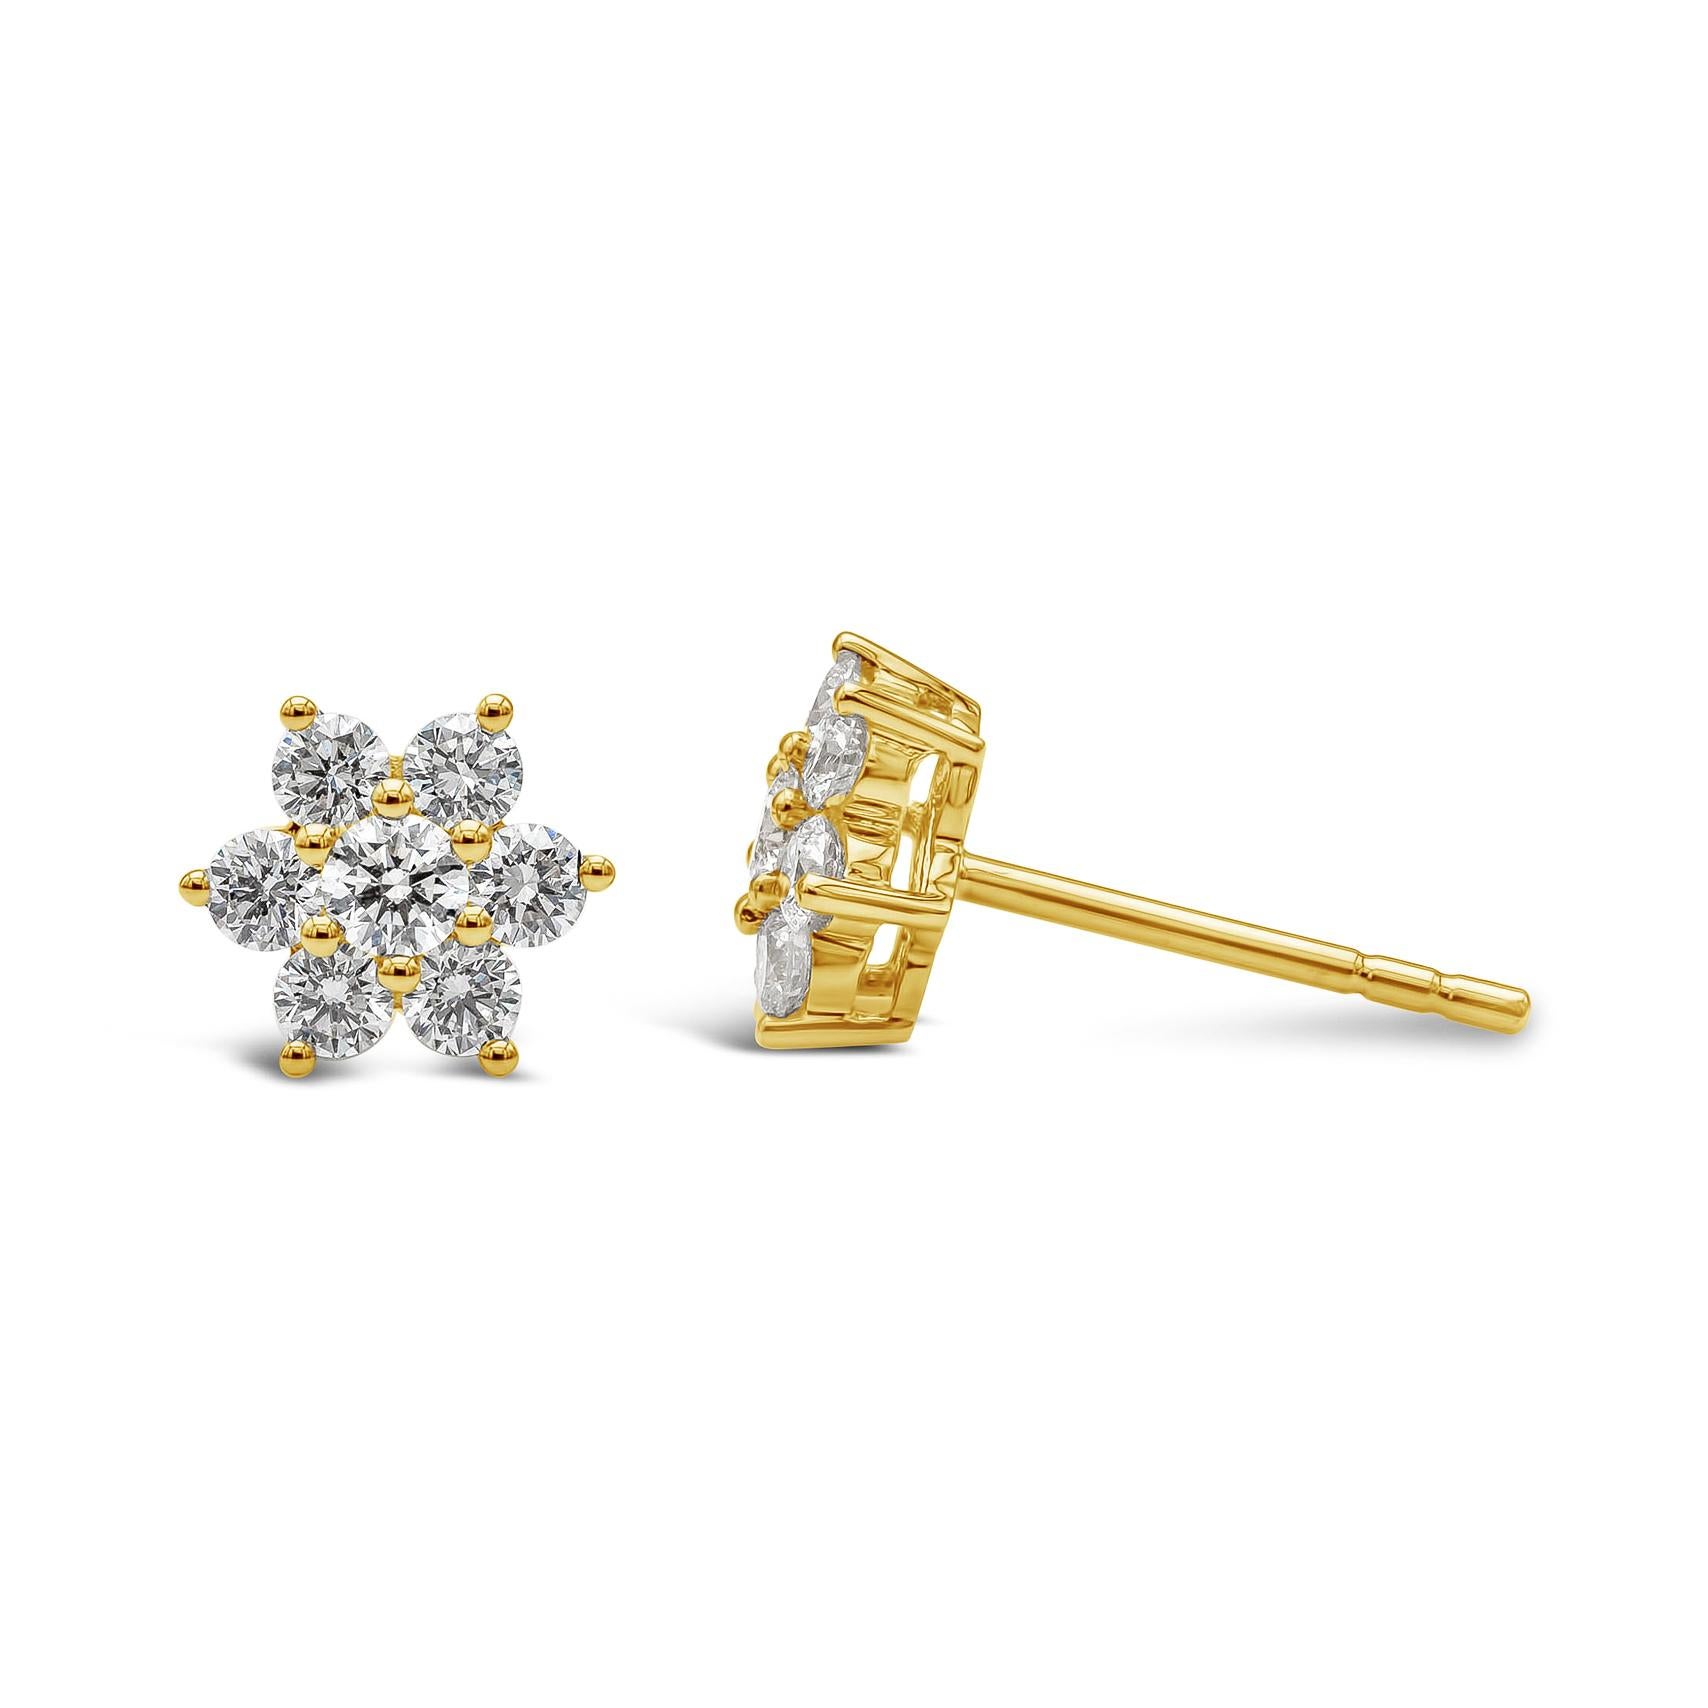 A simple and stylish pair of stud earrings featuring round brilliant diamonds, set in a floral motif made in 18k yellow gold. Diamonds weigh 0.66 carats total. A perfect everyday piece to wear. 

Style available in different price ranges. Prices are